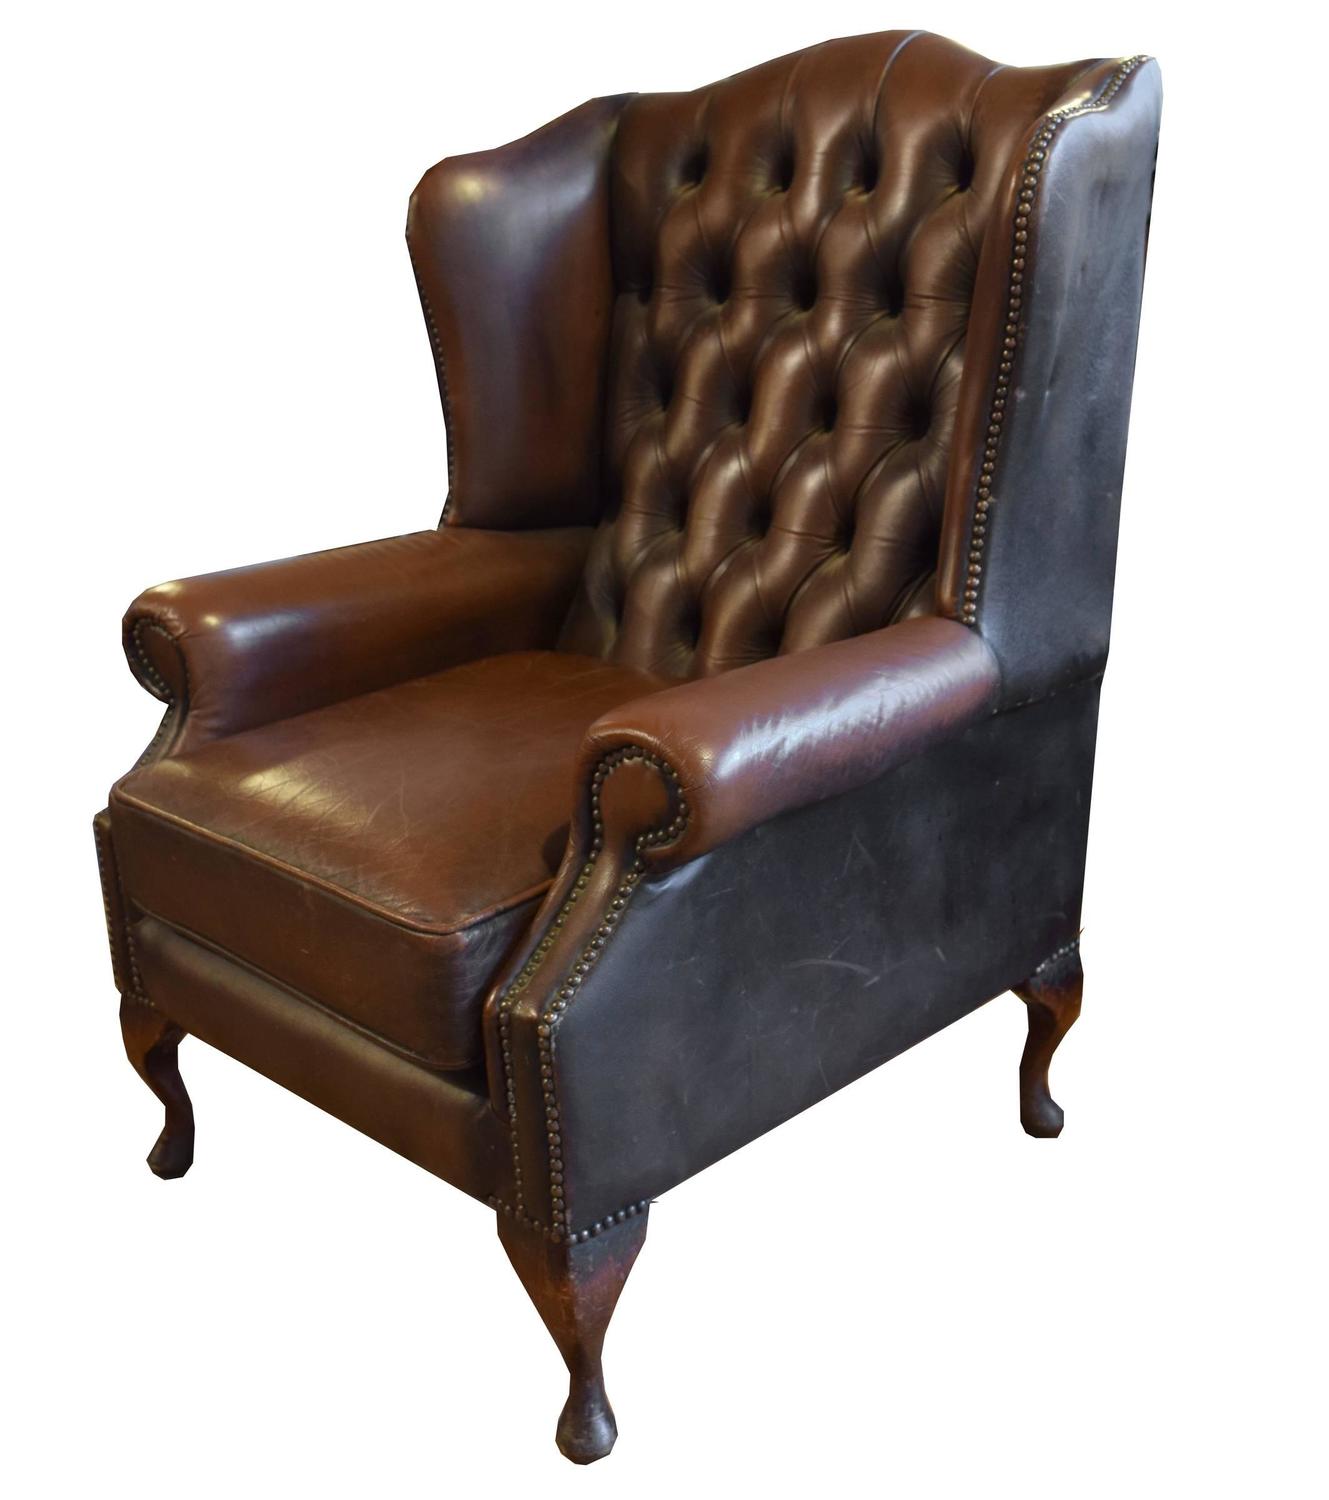 Tufted Leather Wing Chair For Sale at 1stdibs